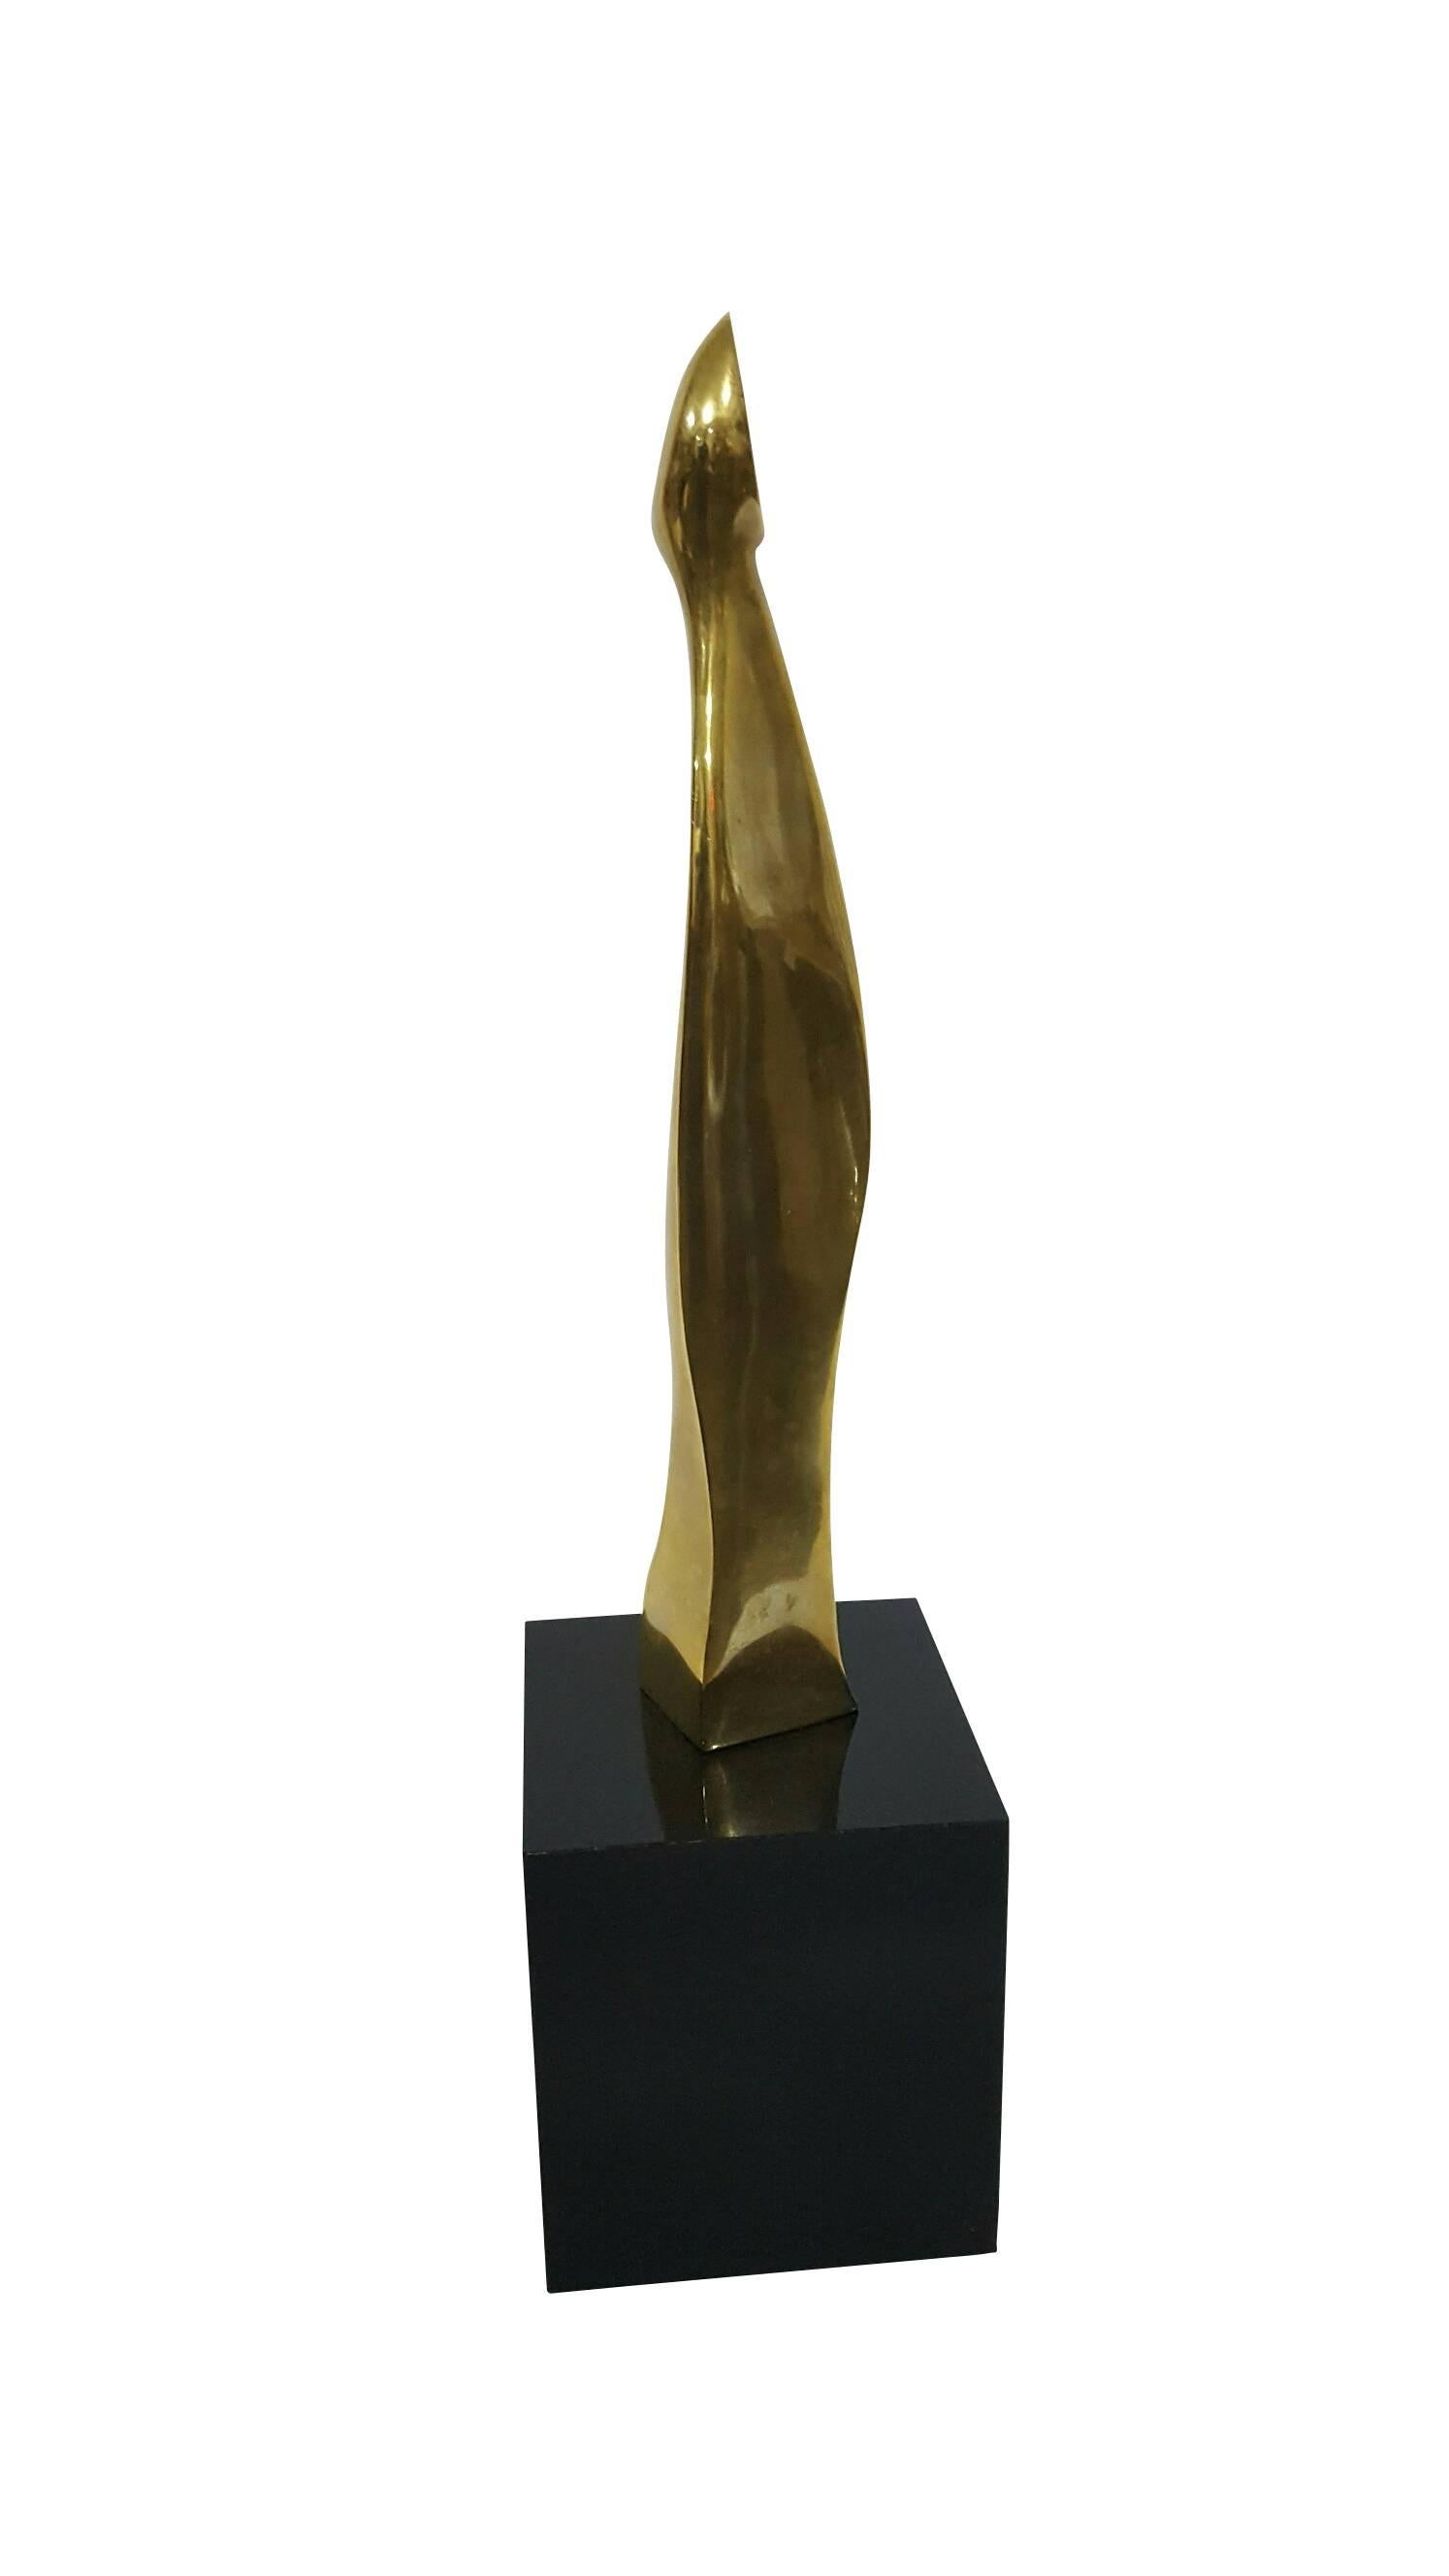 Grandiose Abstract Form II 
by Alfred Burlini.
Circa 1970s
Vintage piece in bronze.
In Acrylic base.
One of the kind.